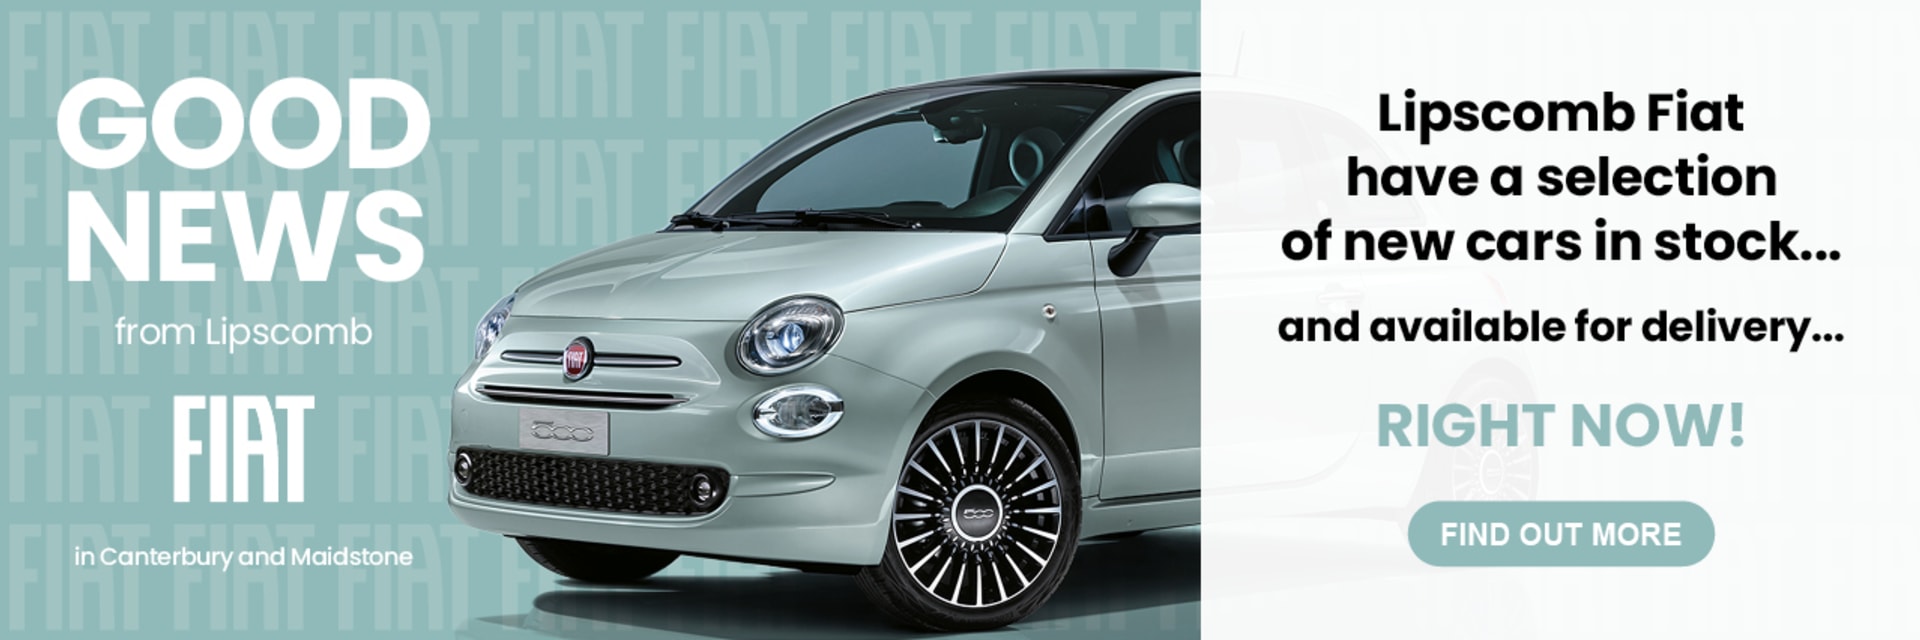 Fiat New Car Stock Offers